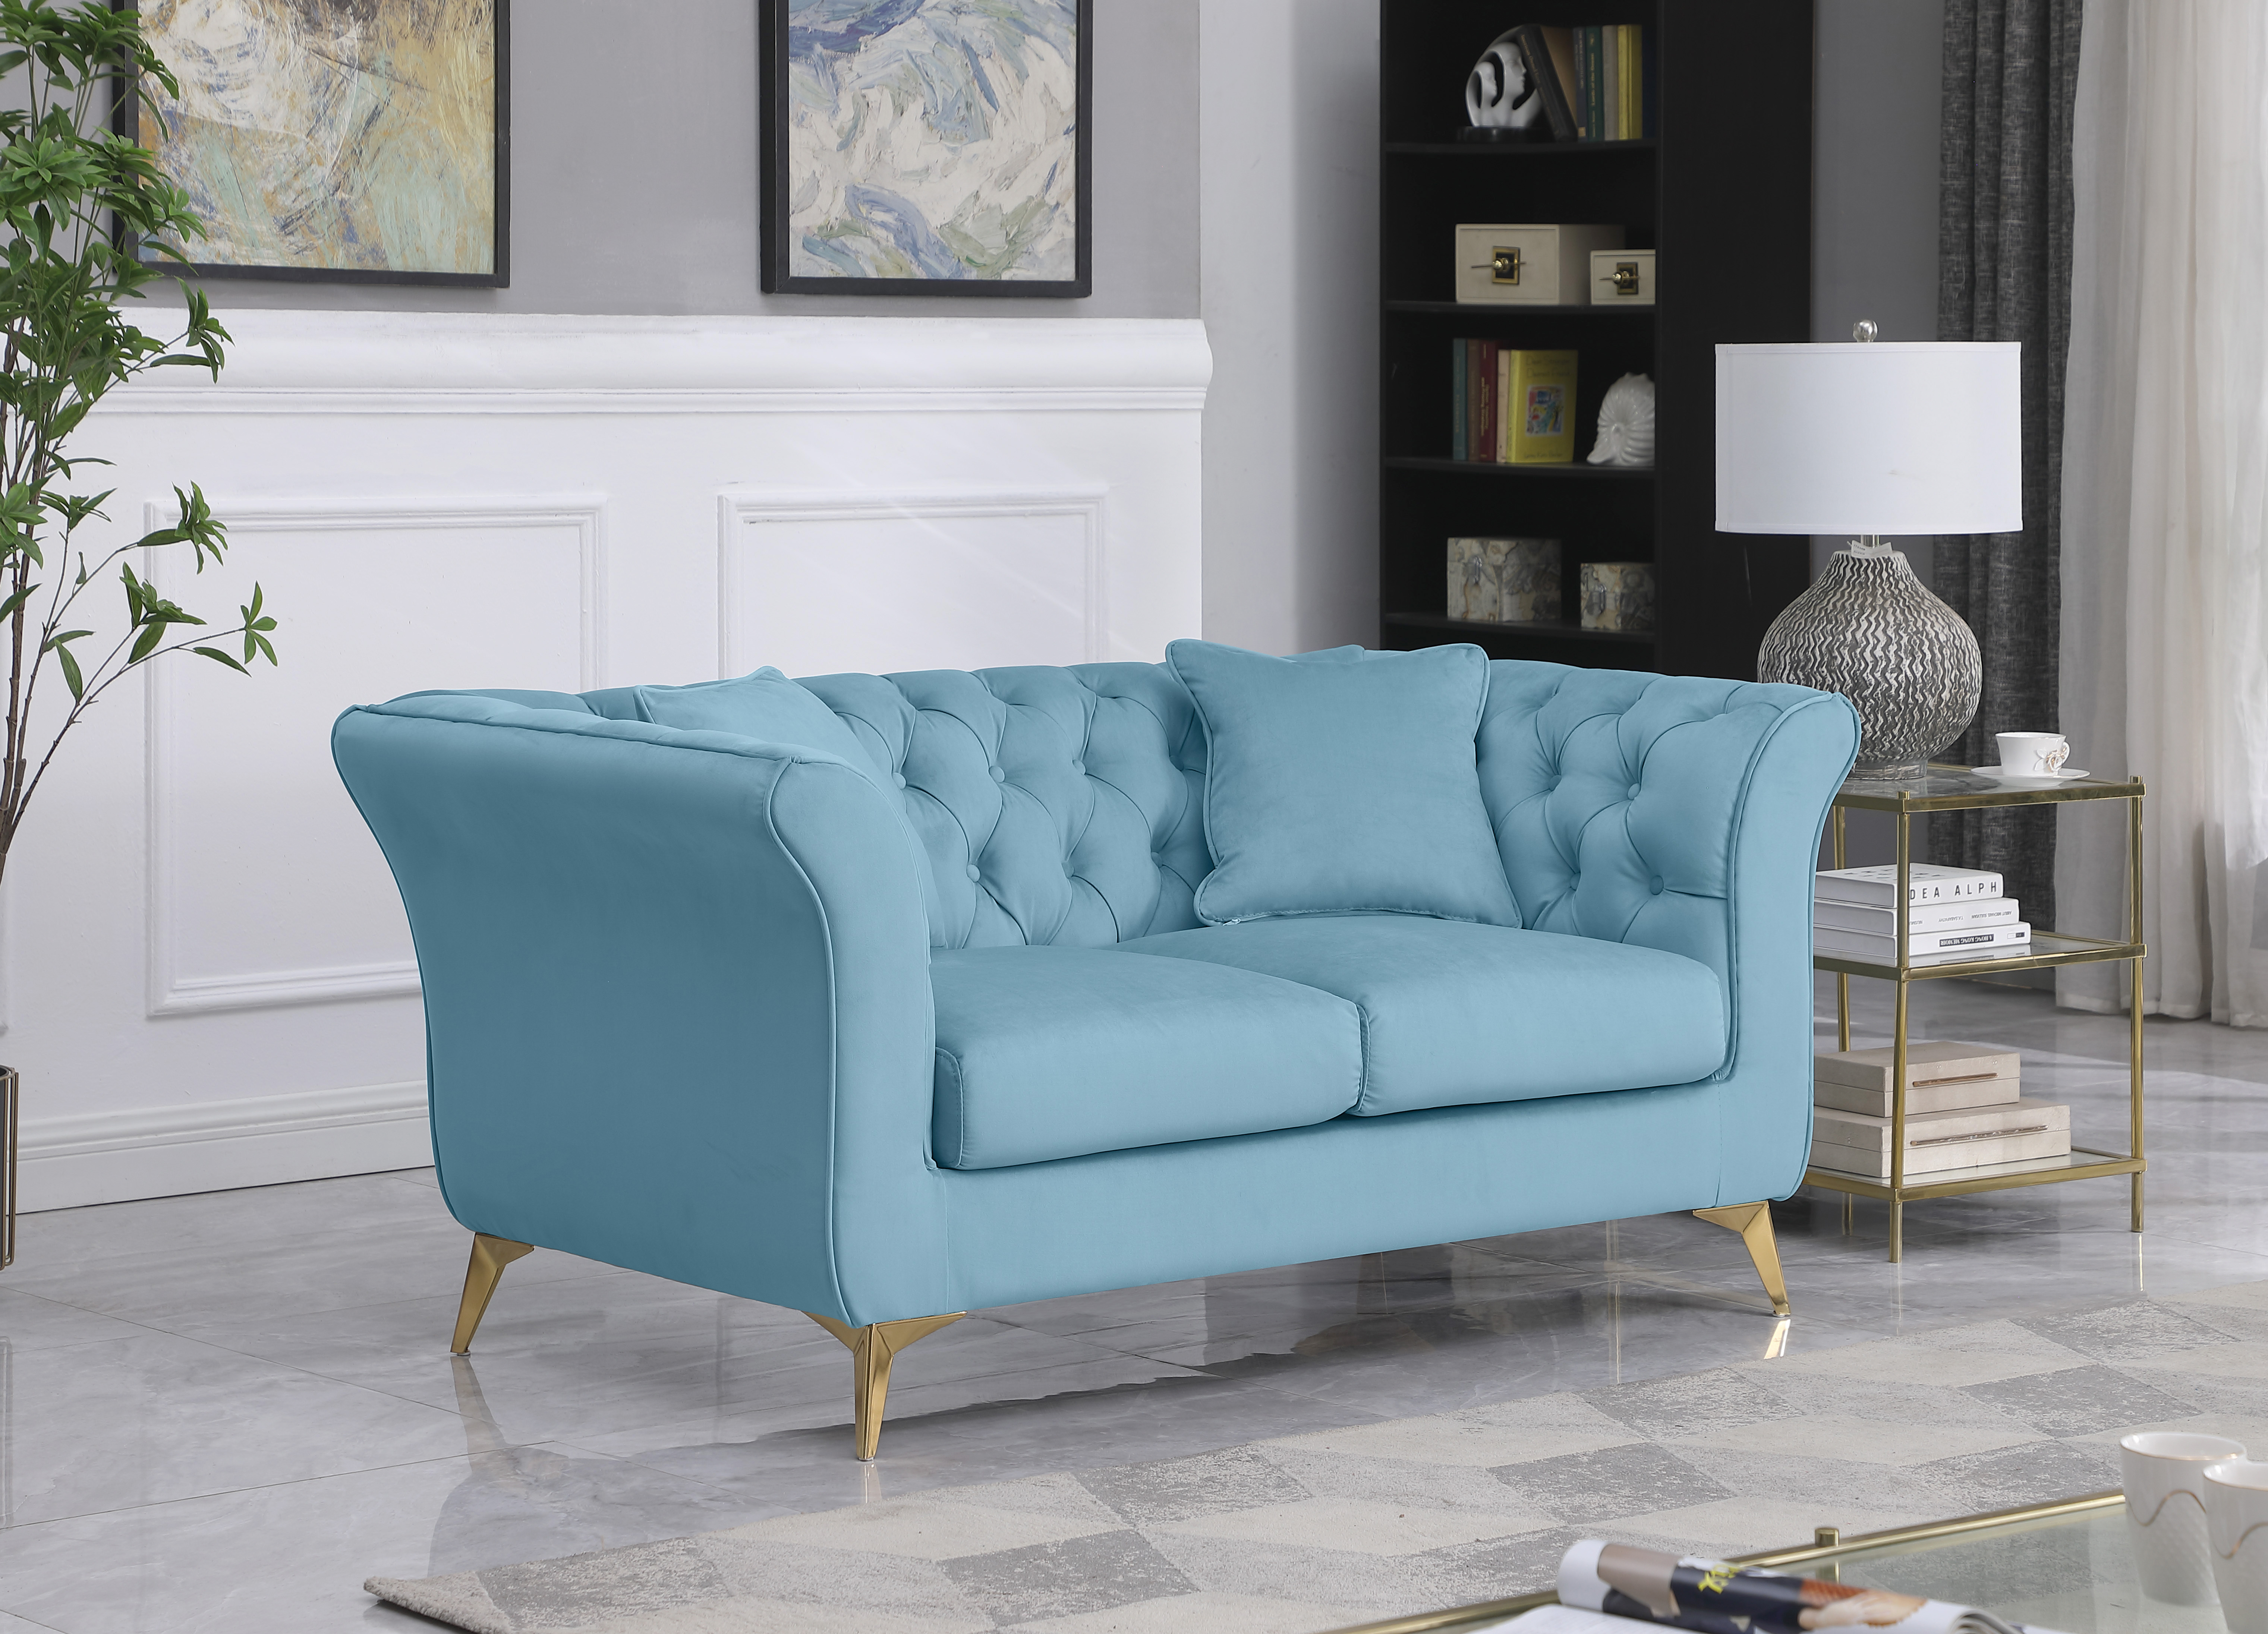 Chesterfield sofa ,Stanford sofa ,  high quality Chesterfield sofa ,Teal blue , tufted and wrinkled fabric  sofa;contemporary Stanford sofa .loverseater; tufted sofa with scroll  arm and scroll back-Boyel Living